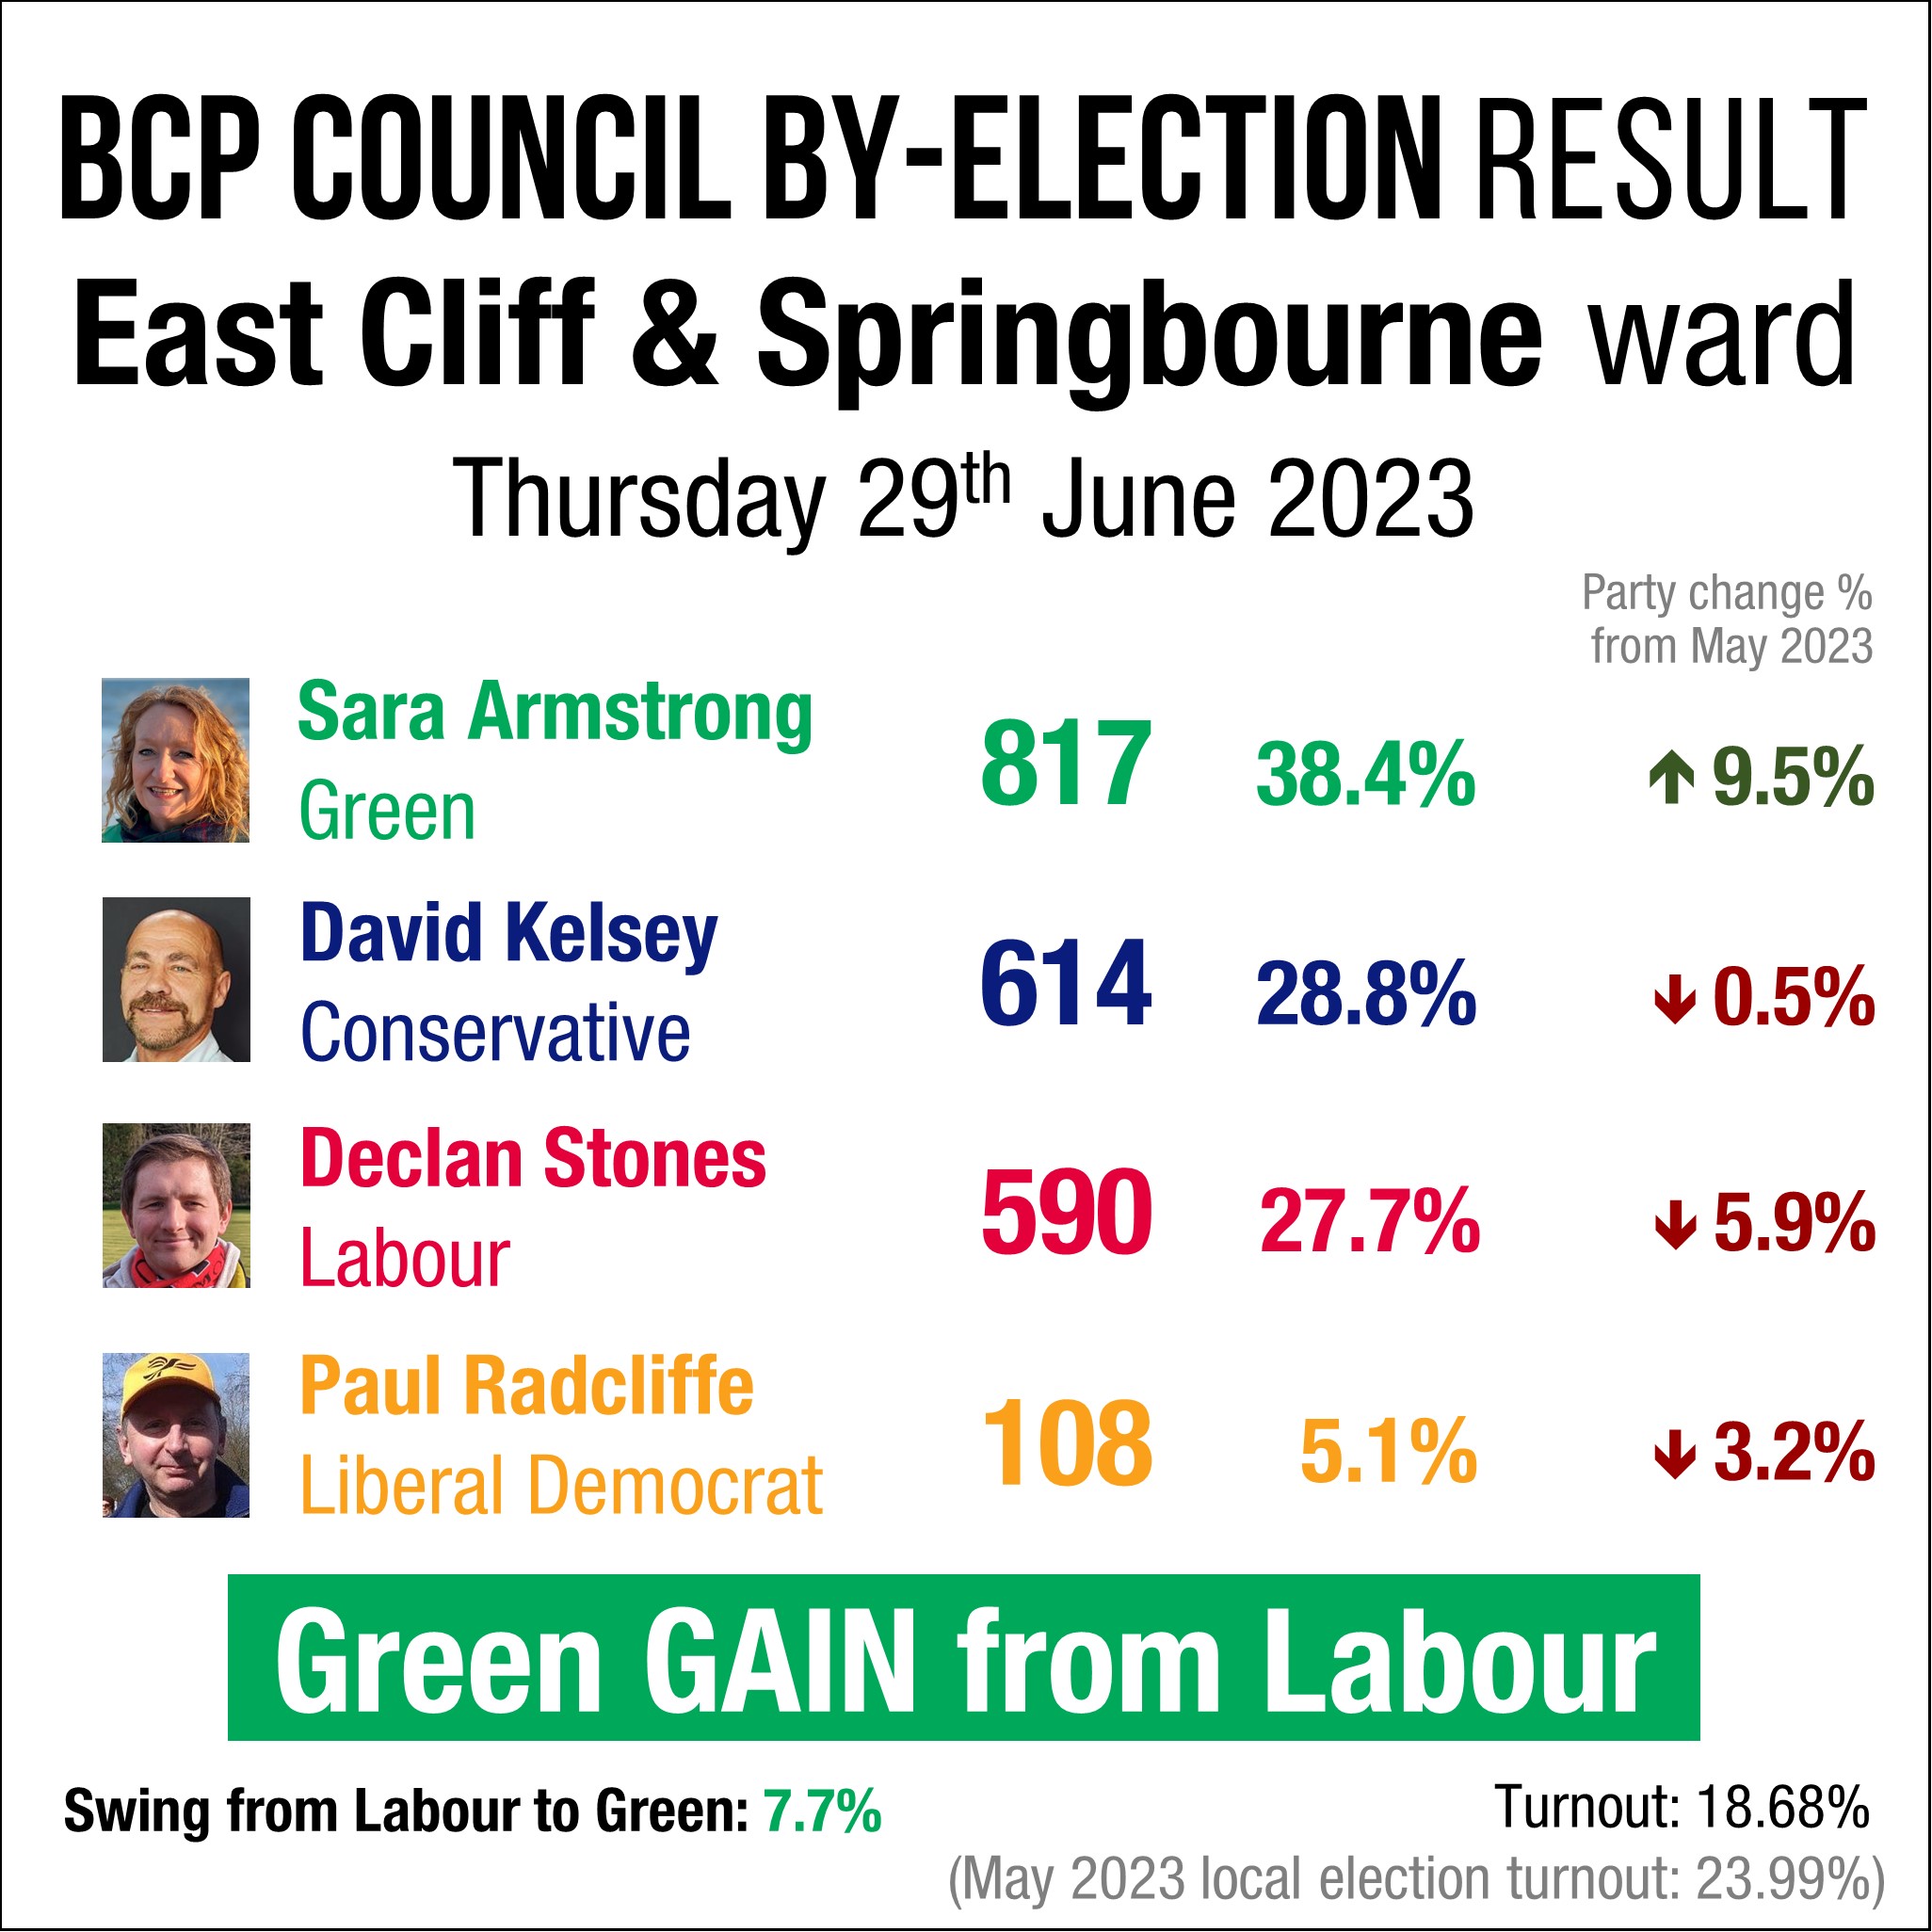 Full result of East Cliff & Springbourne by-election